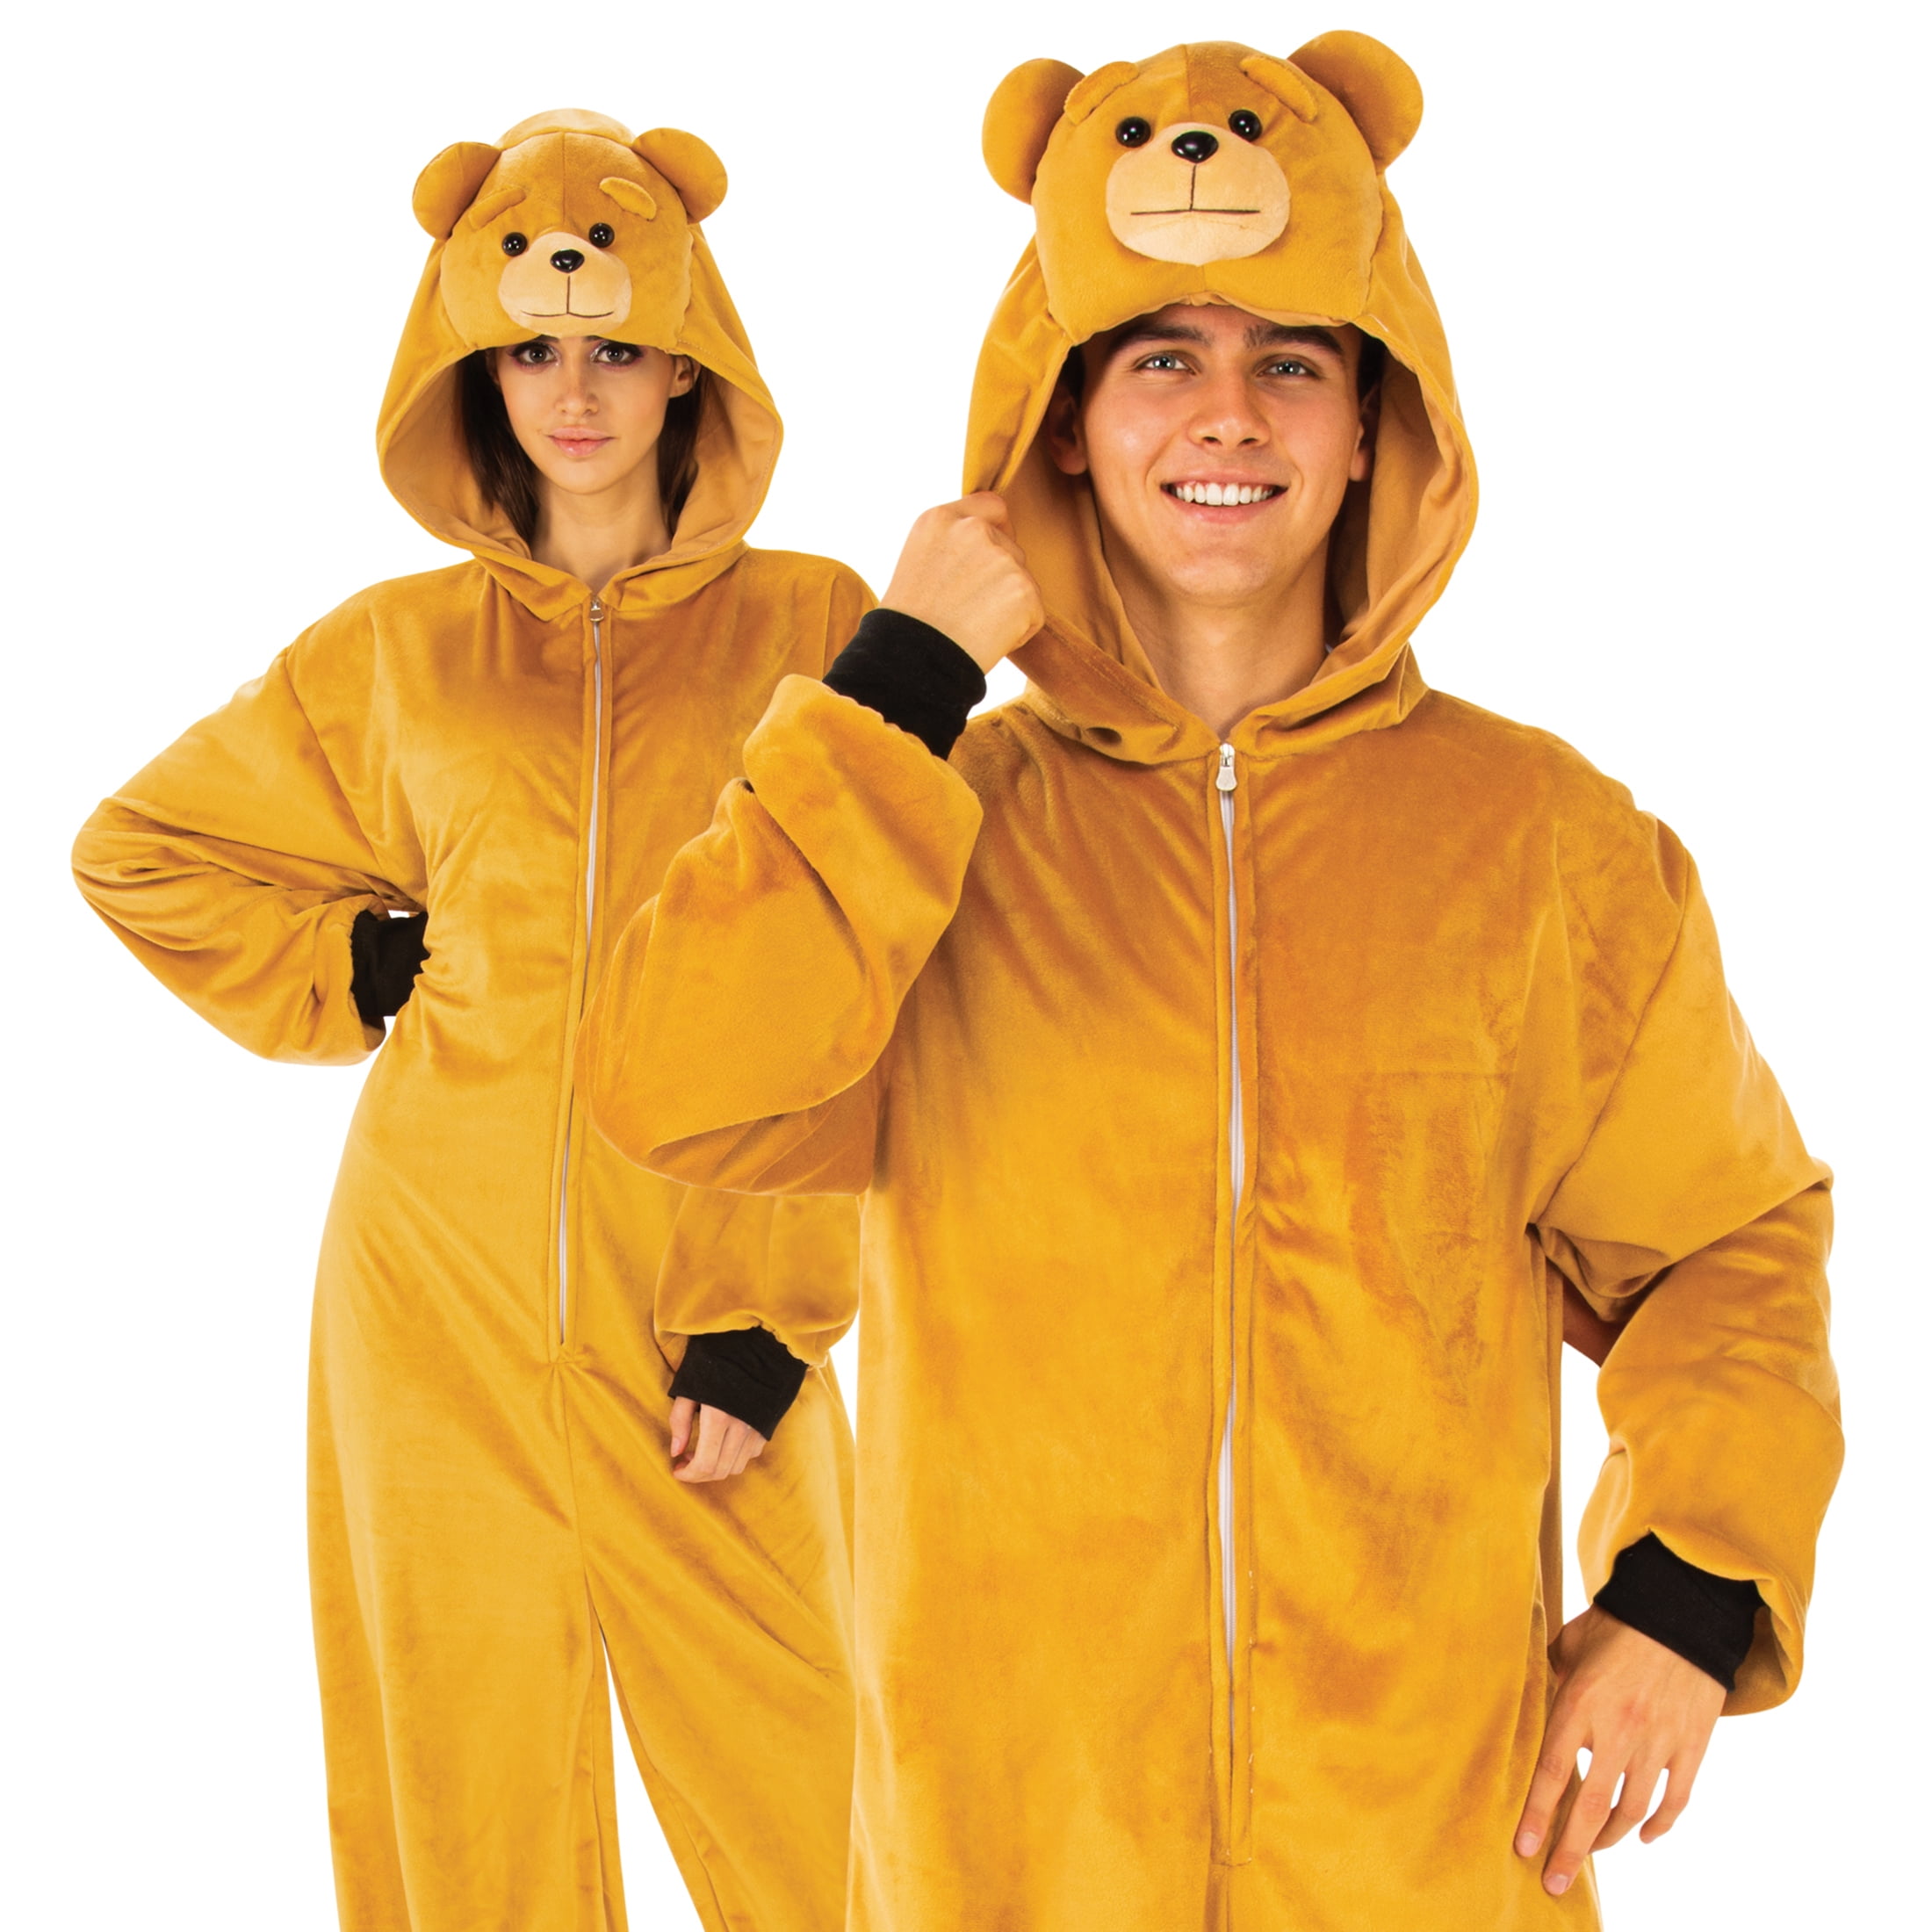 Adult Unisex Way to Celebrate Bear Onezie Halloween Costume L/XL, Brown